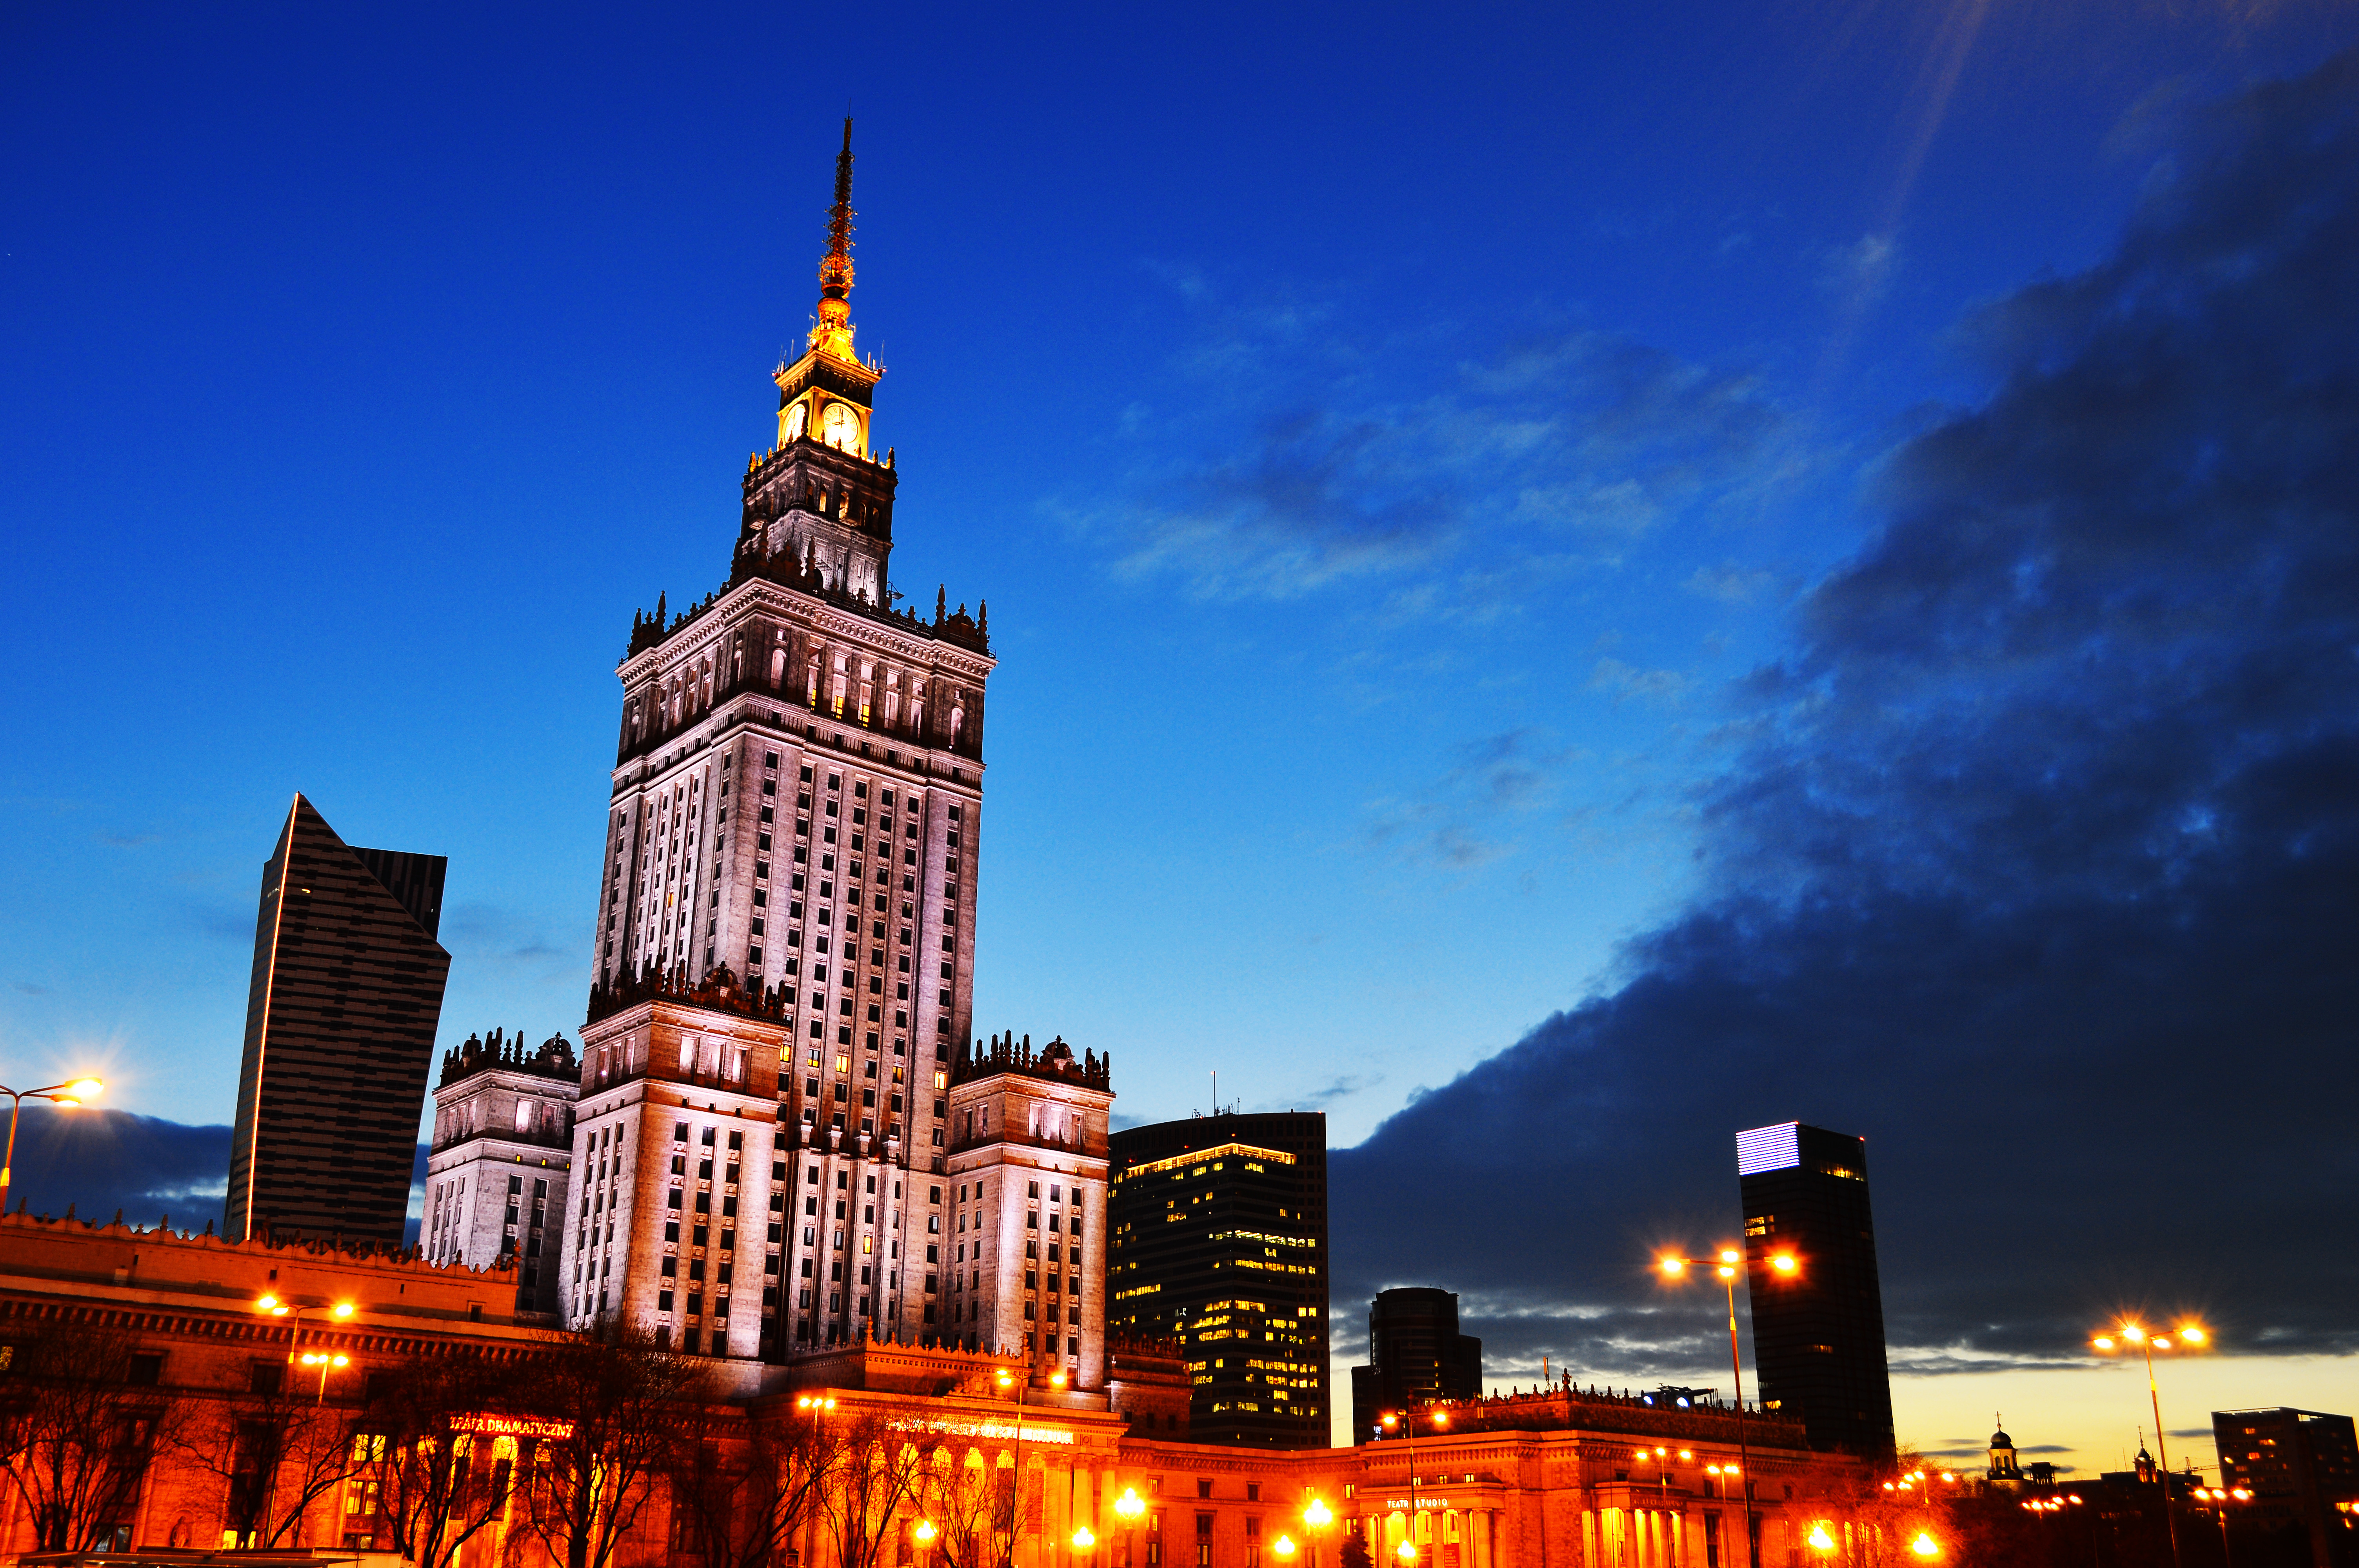 The Palace of Culture & Science - Visit Poland DMC